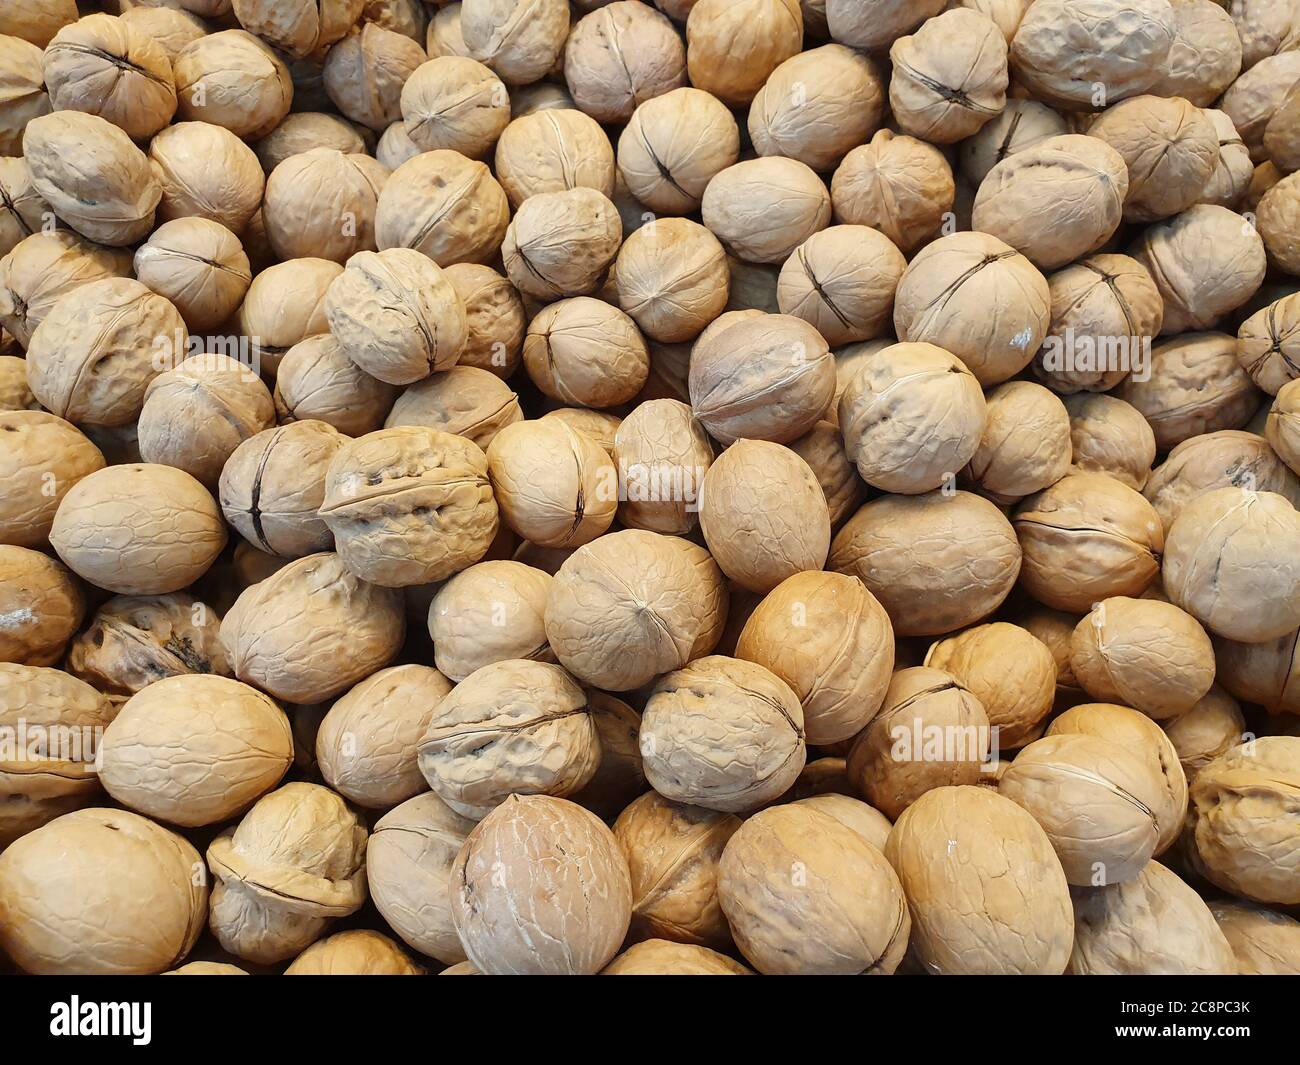 Lots of inshell walnuts.  Brown walnuts are heaped in a large pile after harvest. Stock Photo